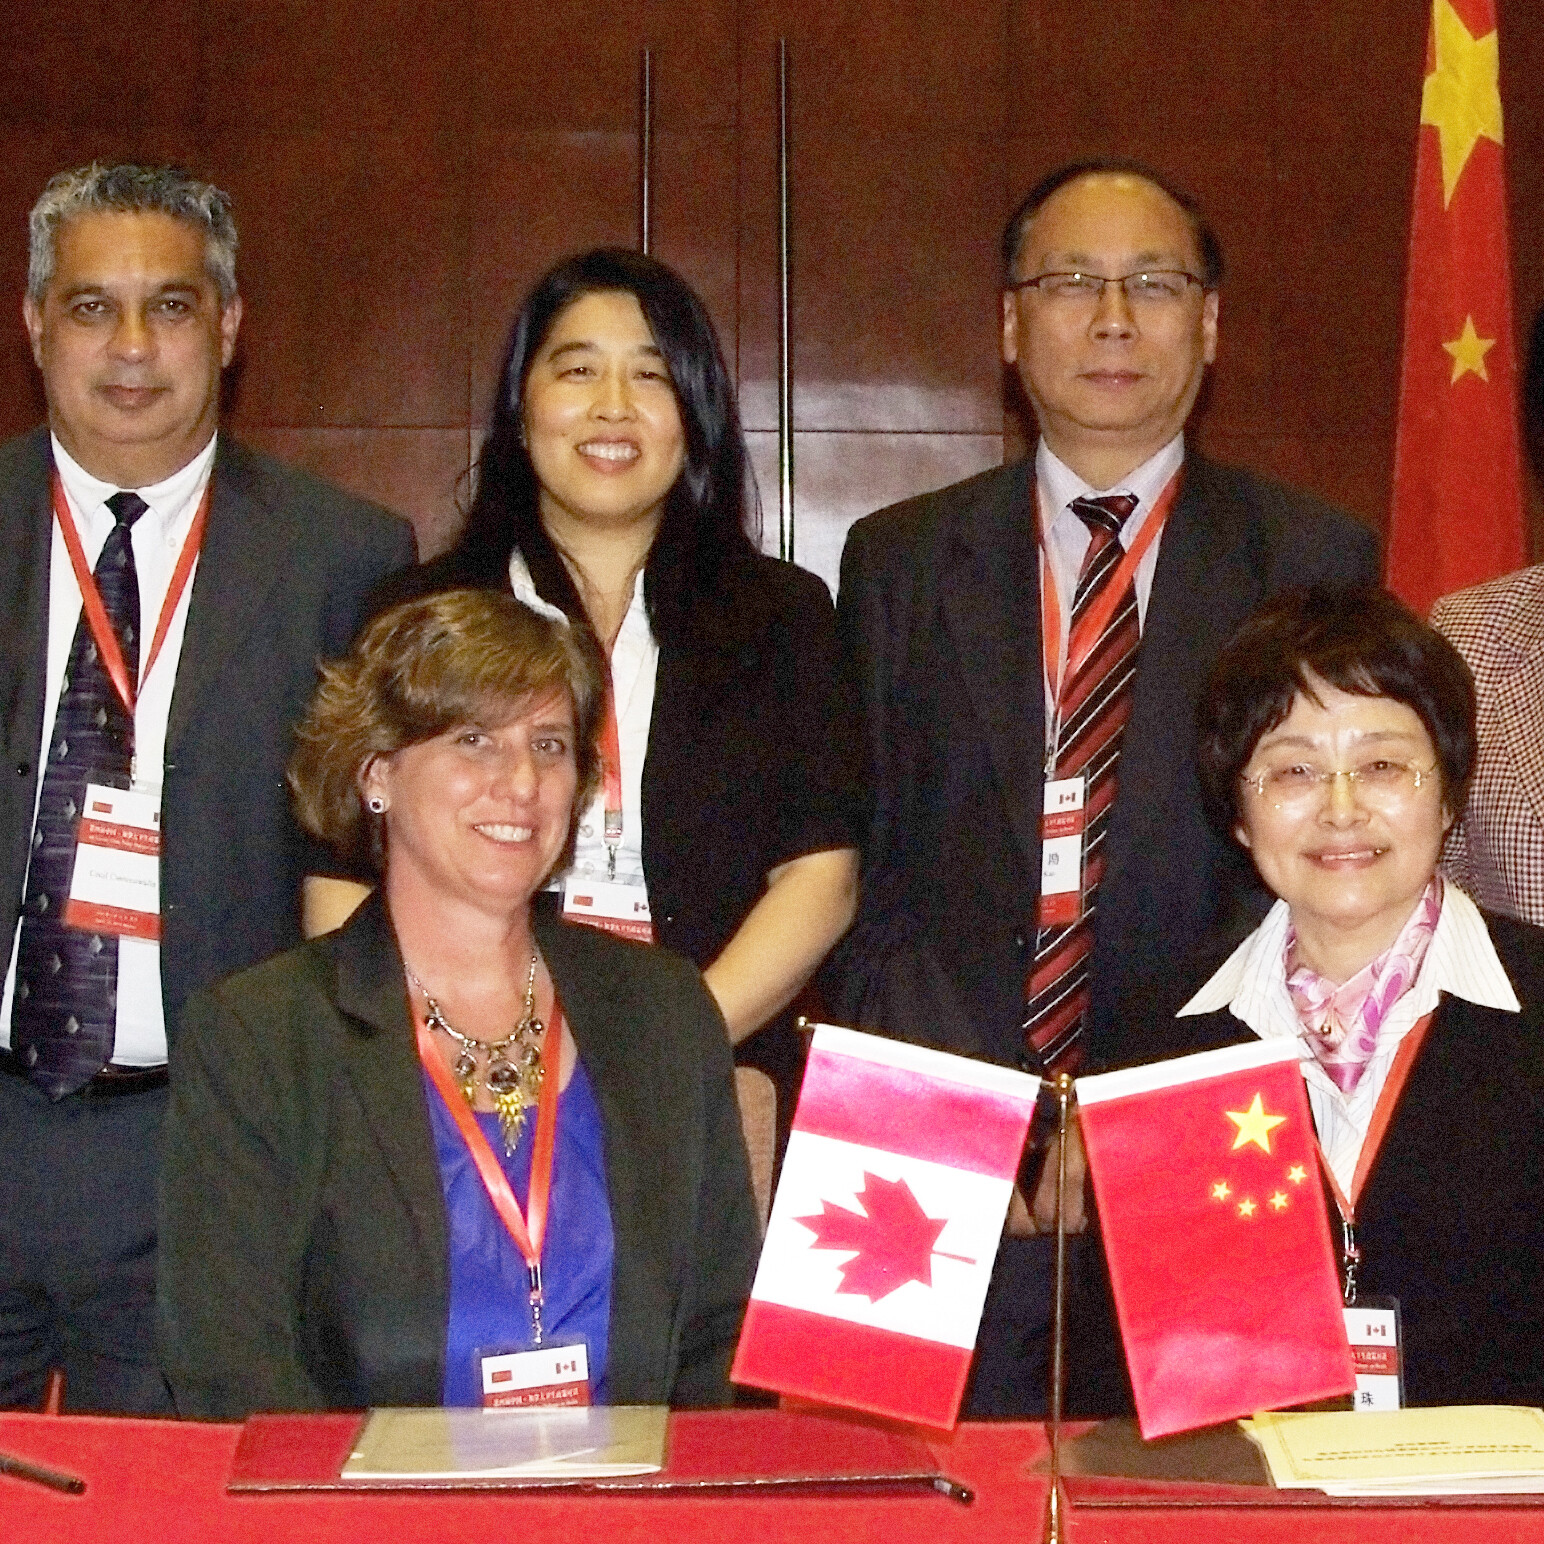 Professor Zhu Shanzhu, Dean of the Department of General Practice, Shanghai Medical College, Fudan University, signing the MOU with DFCM's Professor Cynthia Whitehead